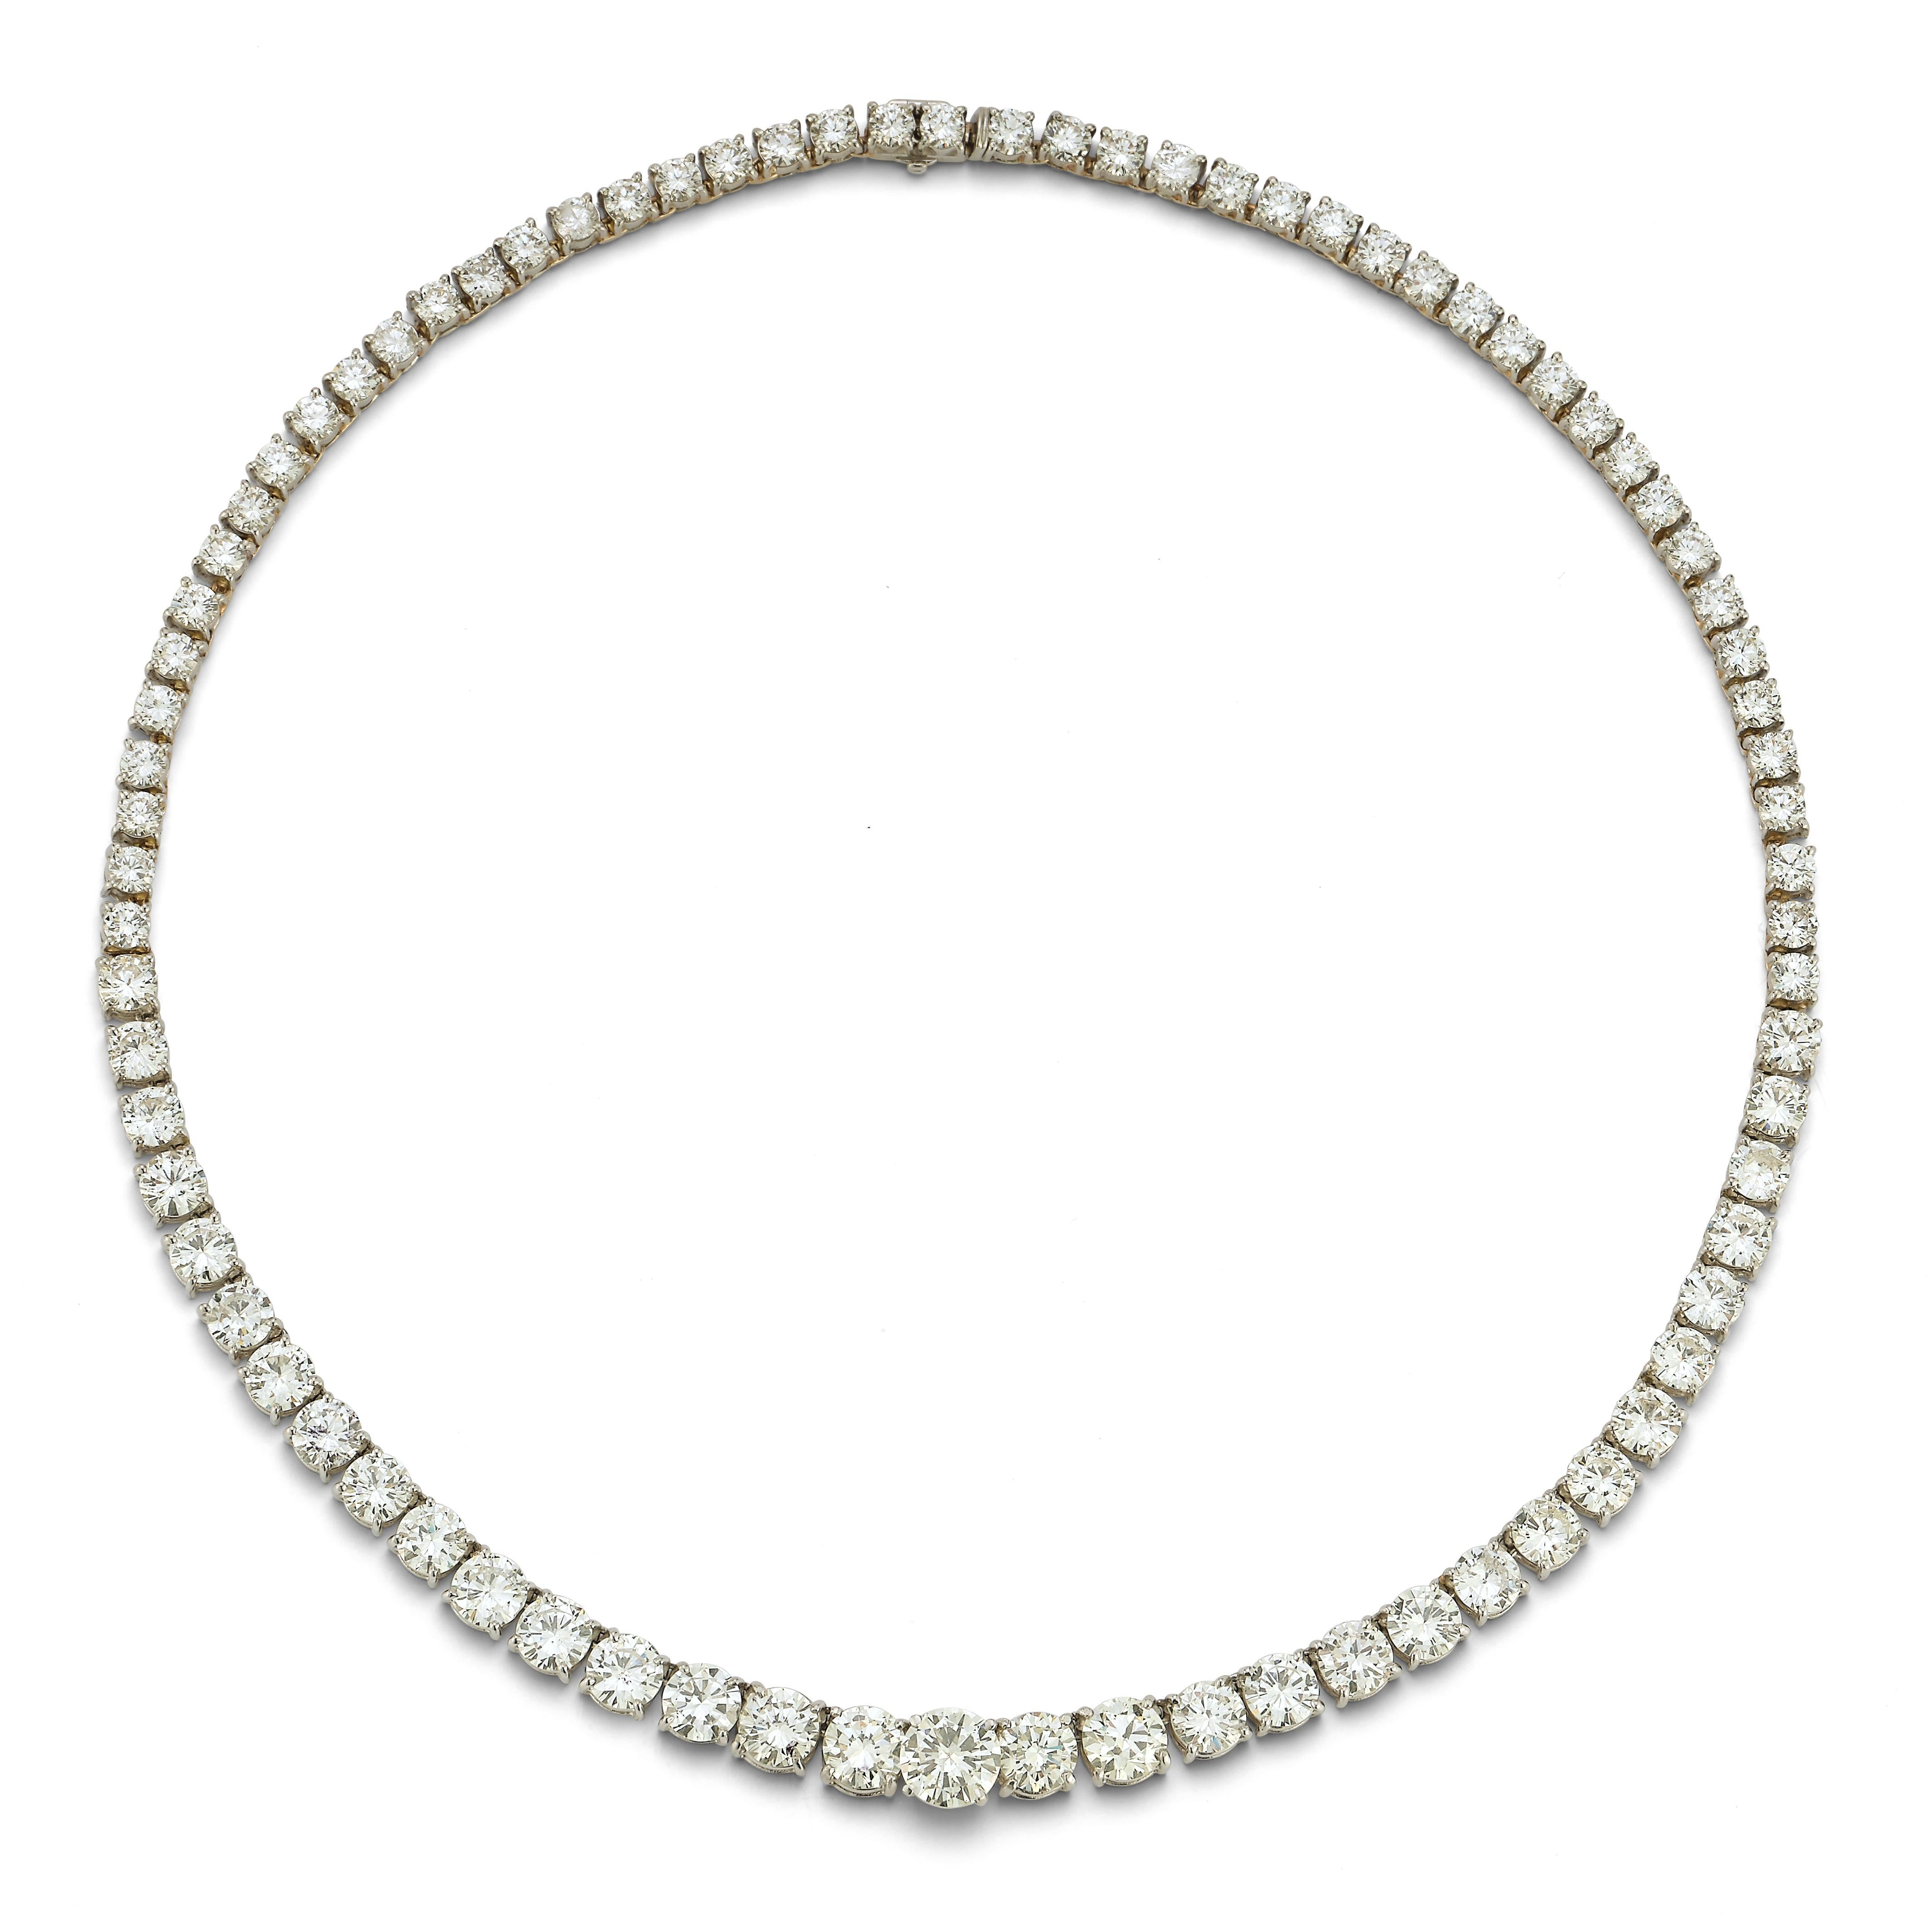 Graduated Diamond Rivière Necklace, an array of 81 graduated round cut diamonds totaling approximately 26.00 carats, including a center diamond weight of approximately 2.00 carats set in platinum. Quality of all stones range around J/K/L color &